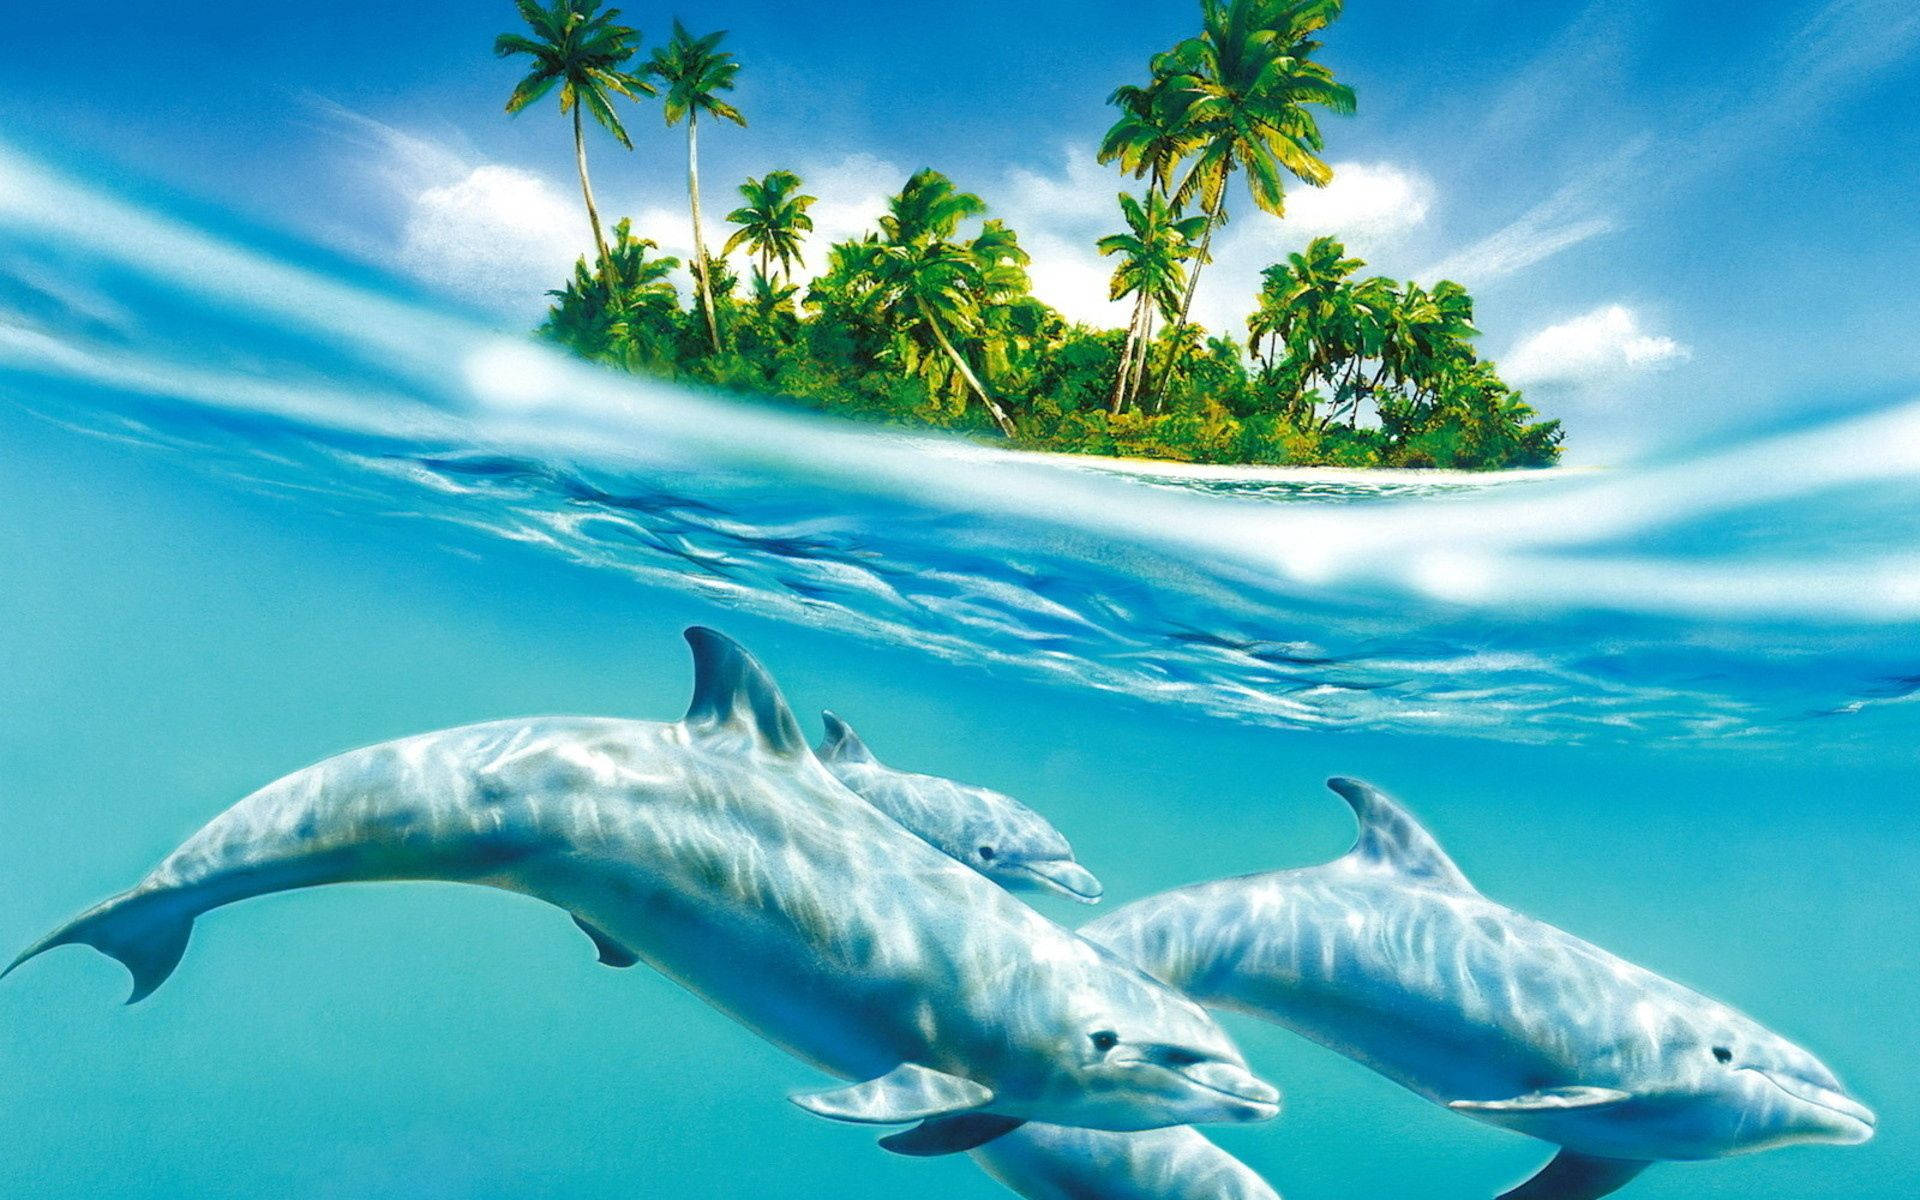 Free Dolphin Wallpaper Downloads, [100+] Dolphin Wallpapers for FREE |  